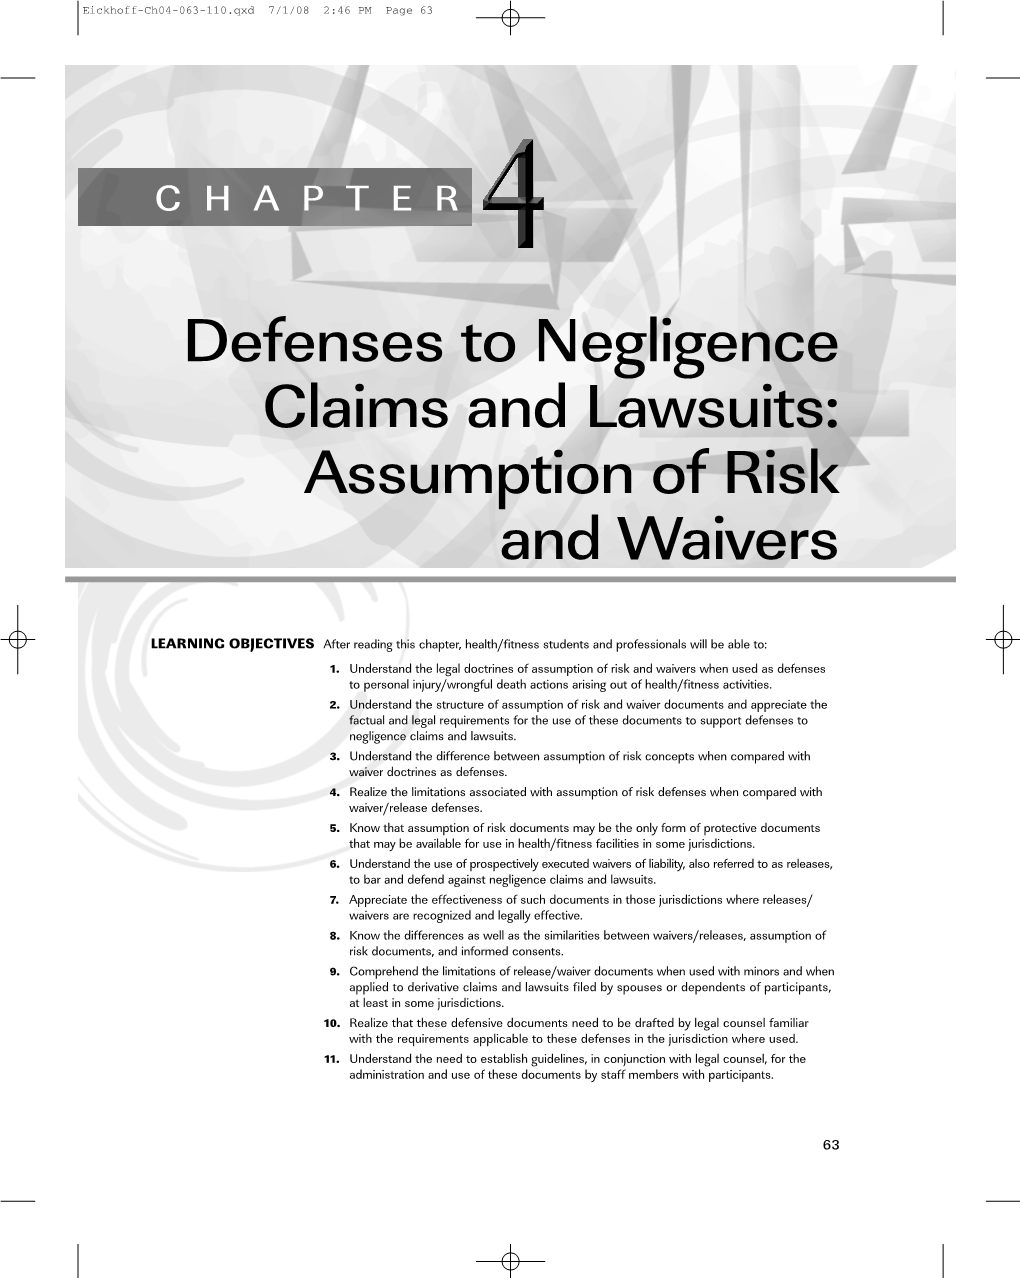 Defenses to Negligence Claims and Lawsuits: Assumption of Risk and Waivers